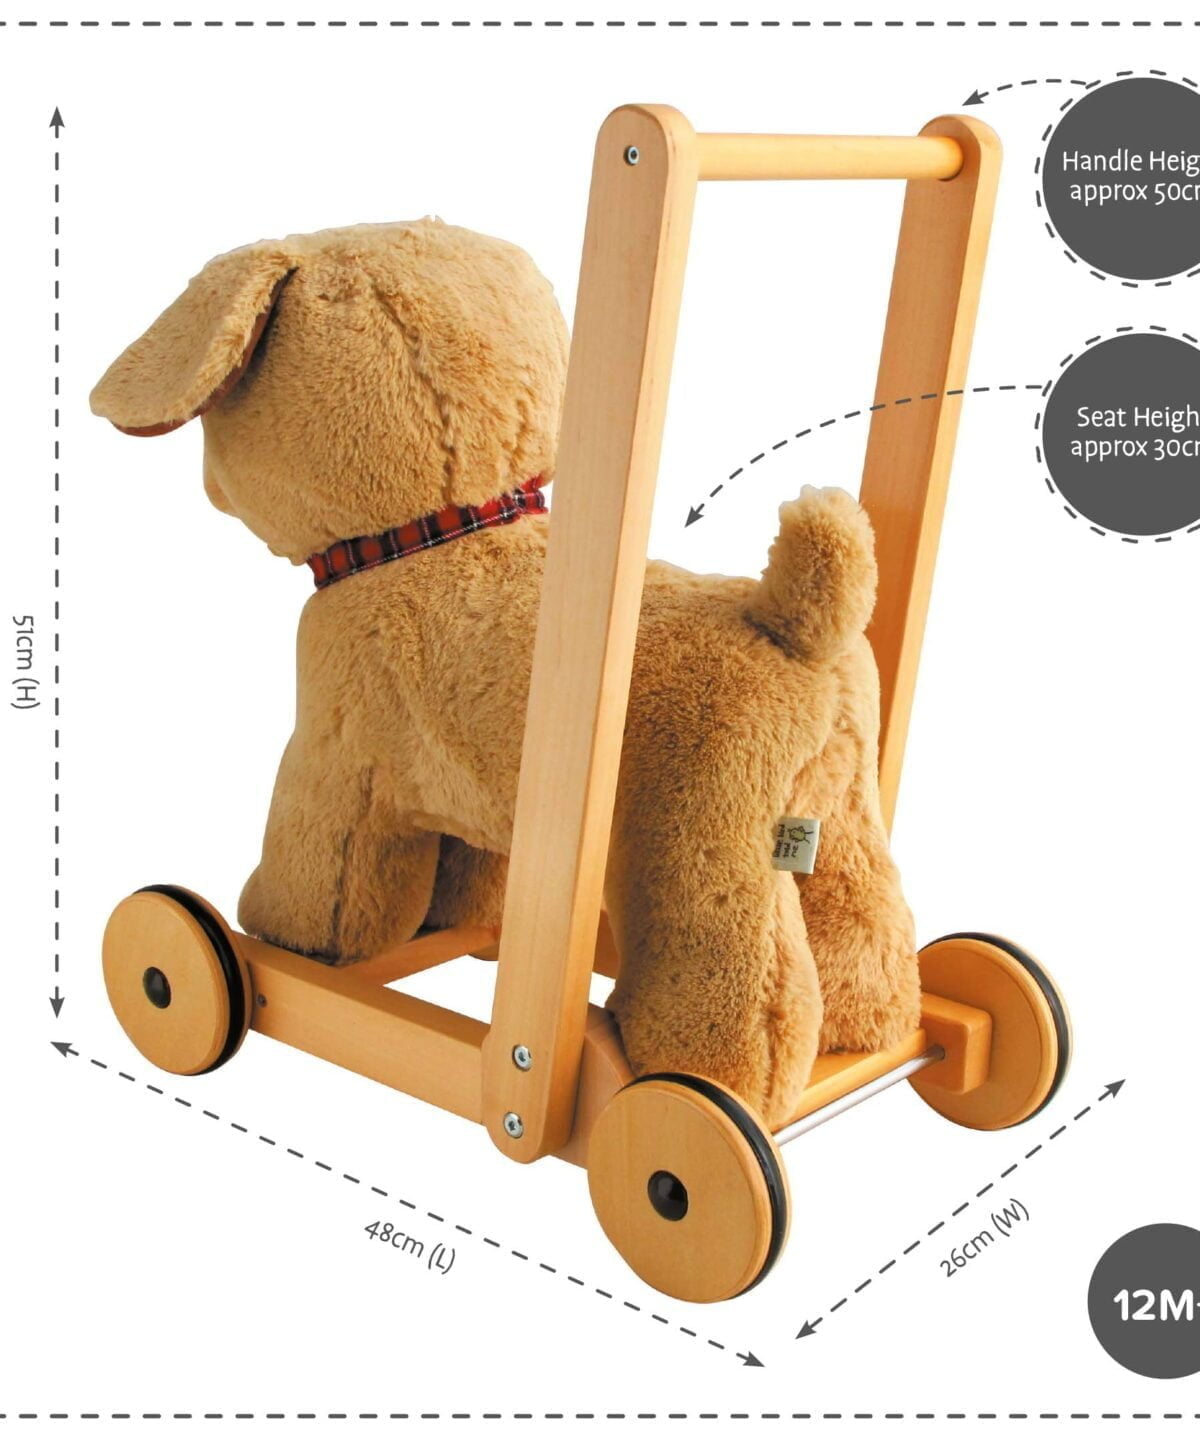 Product dimensions displayed for Dexter Dog Baby Walker